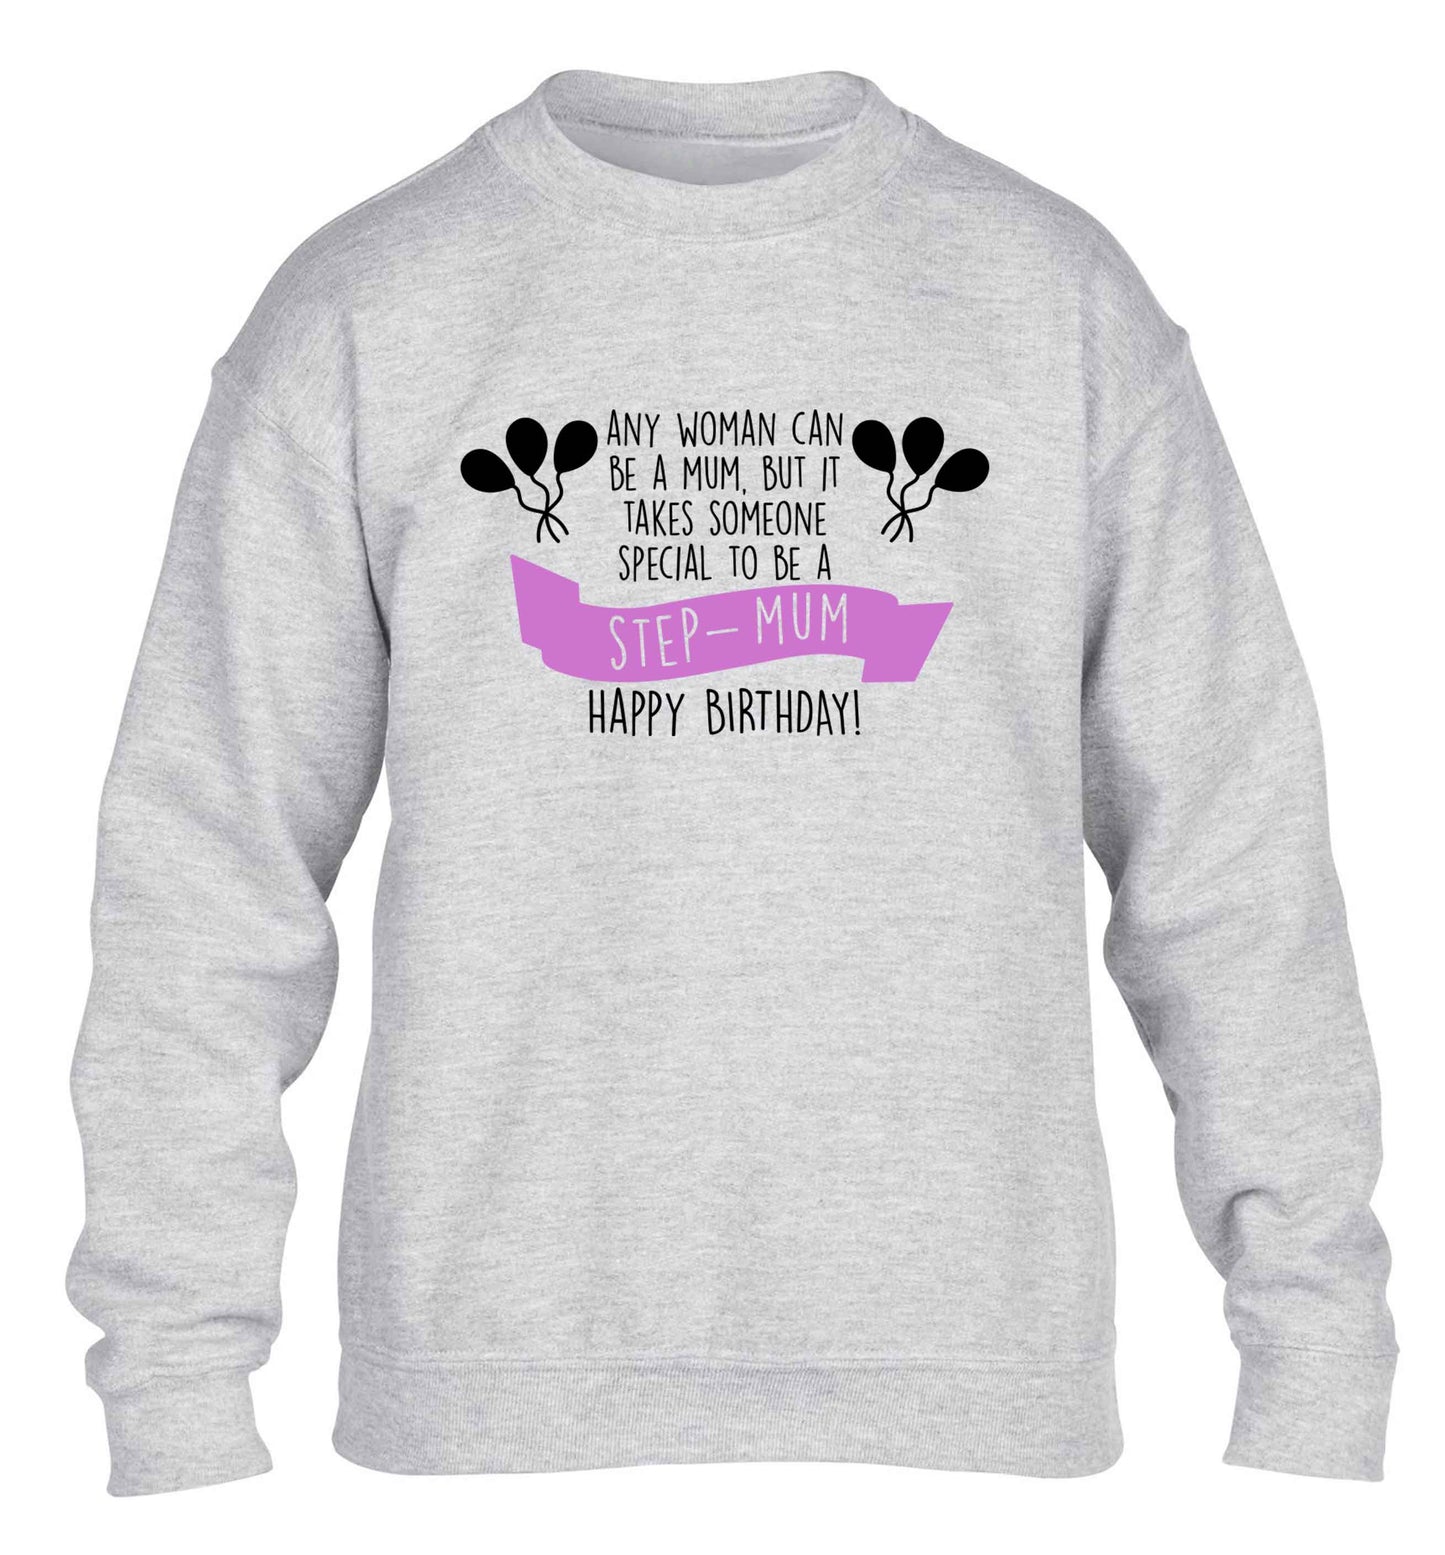 Takes someone special to be a step-mum, happy birthday! children's grey sweater 12-13 Years